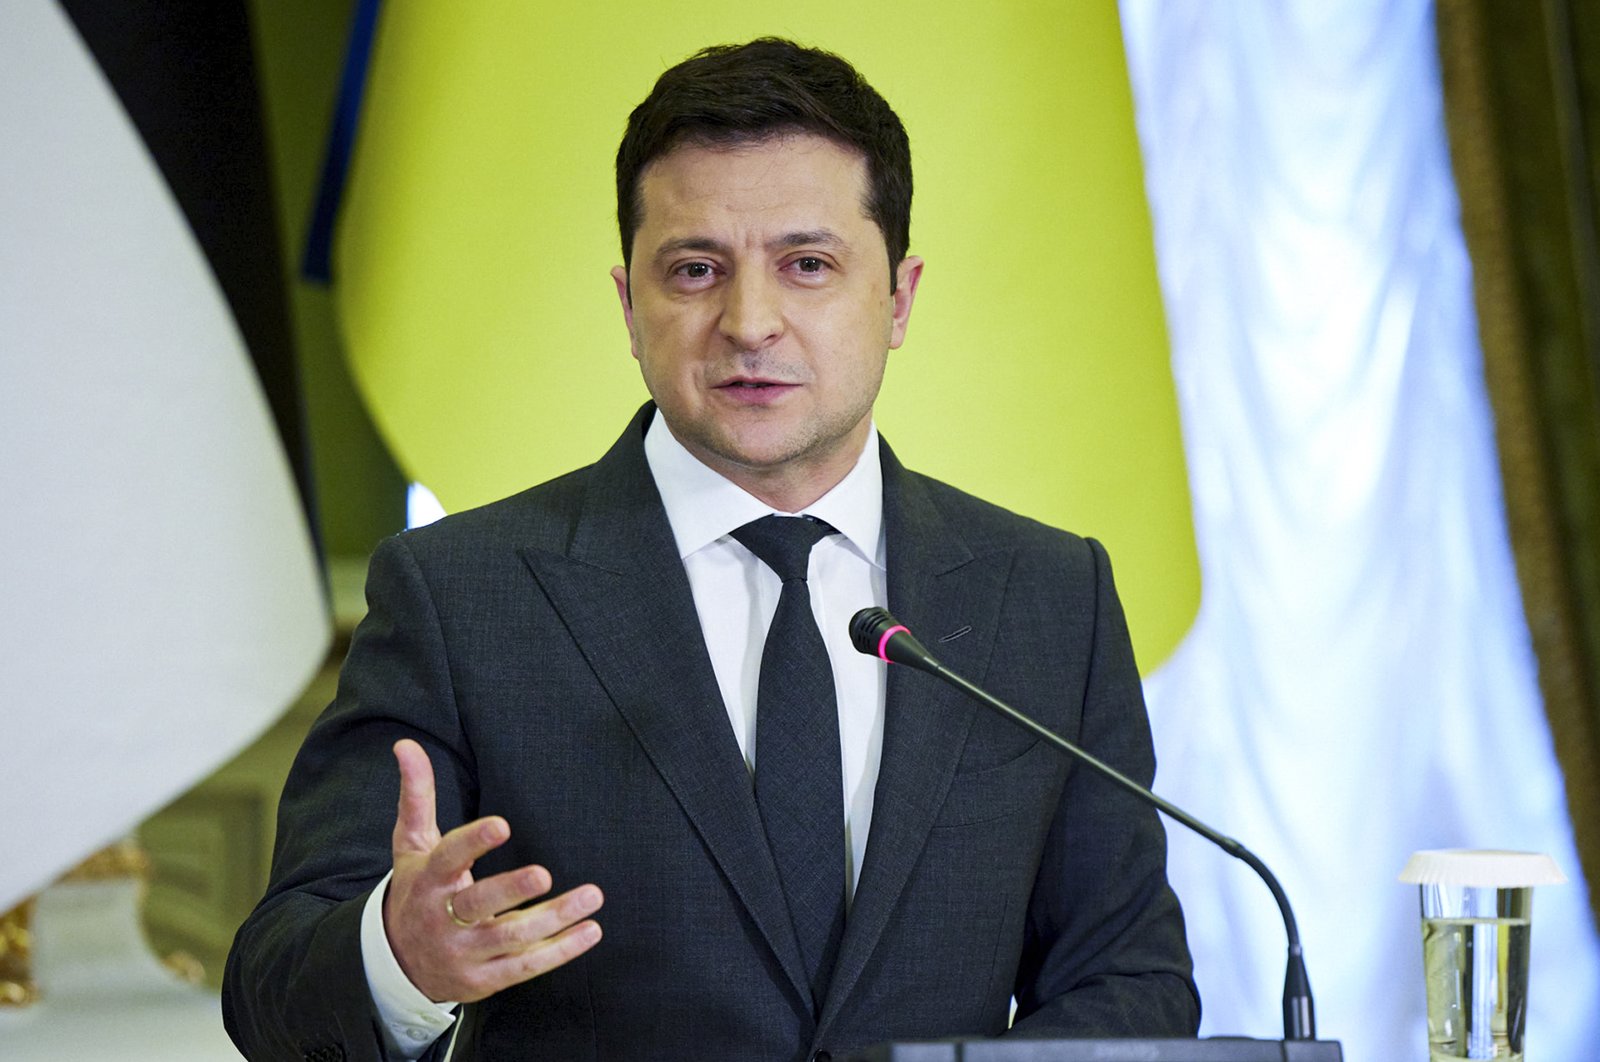 In this photo provided by the Ukrainian Presidential Press Office, Ukrainian President Volodymyr Zelenskyy gestures during a joint news conference with Estonian President Alar Karis following their talks in Kyiv, Ukraine, Tuesday, Feb. 22, 2022. (AP Photo)